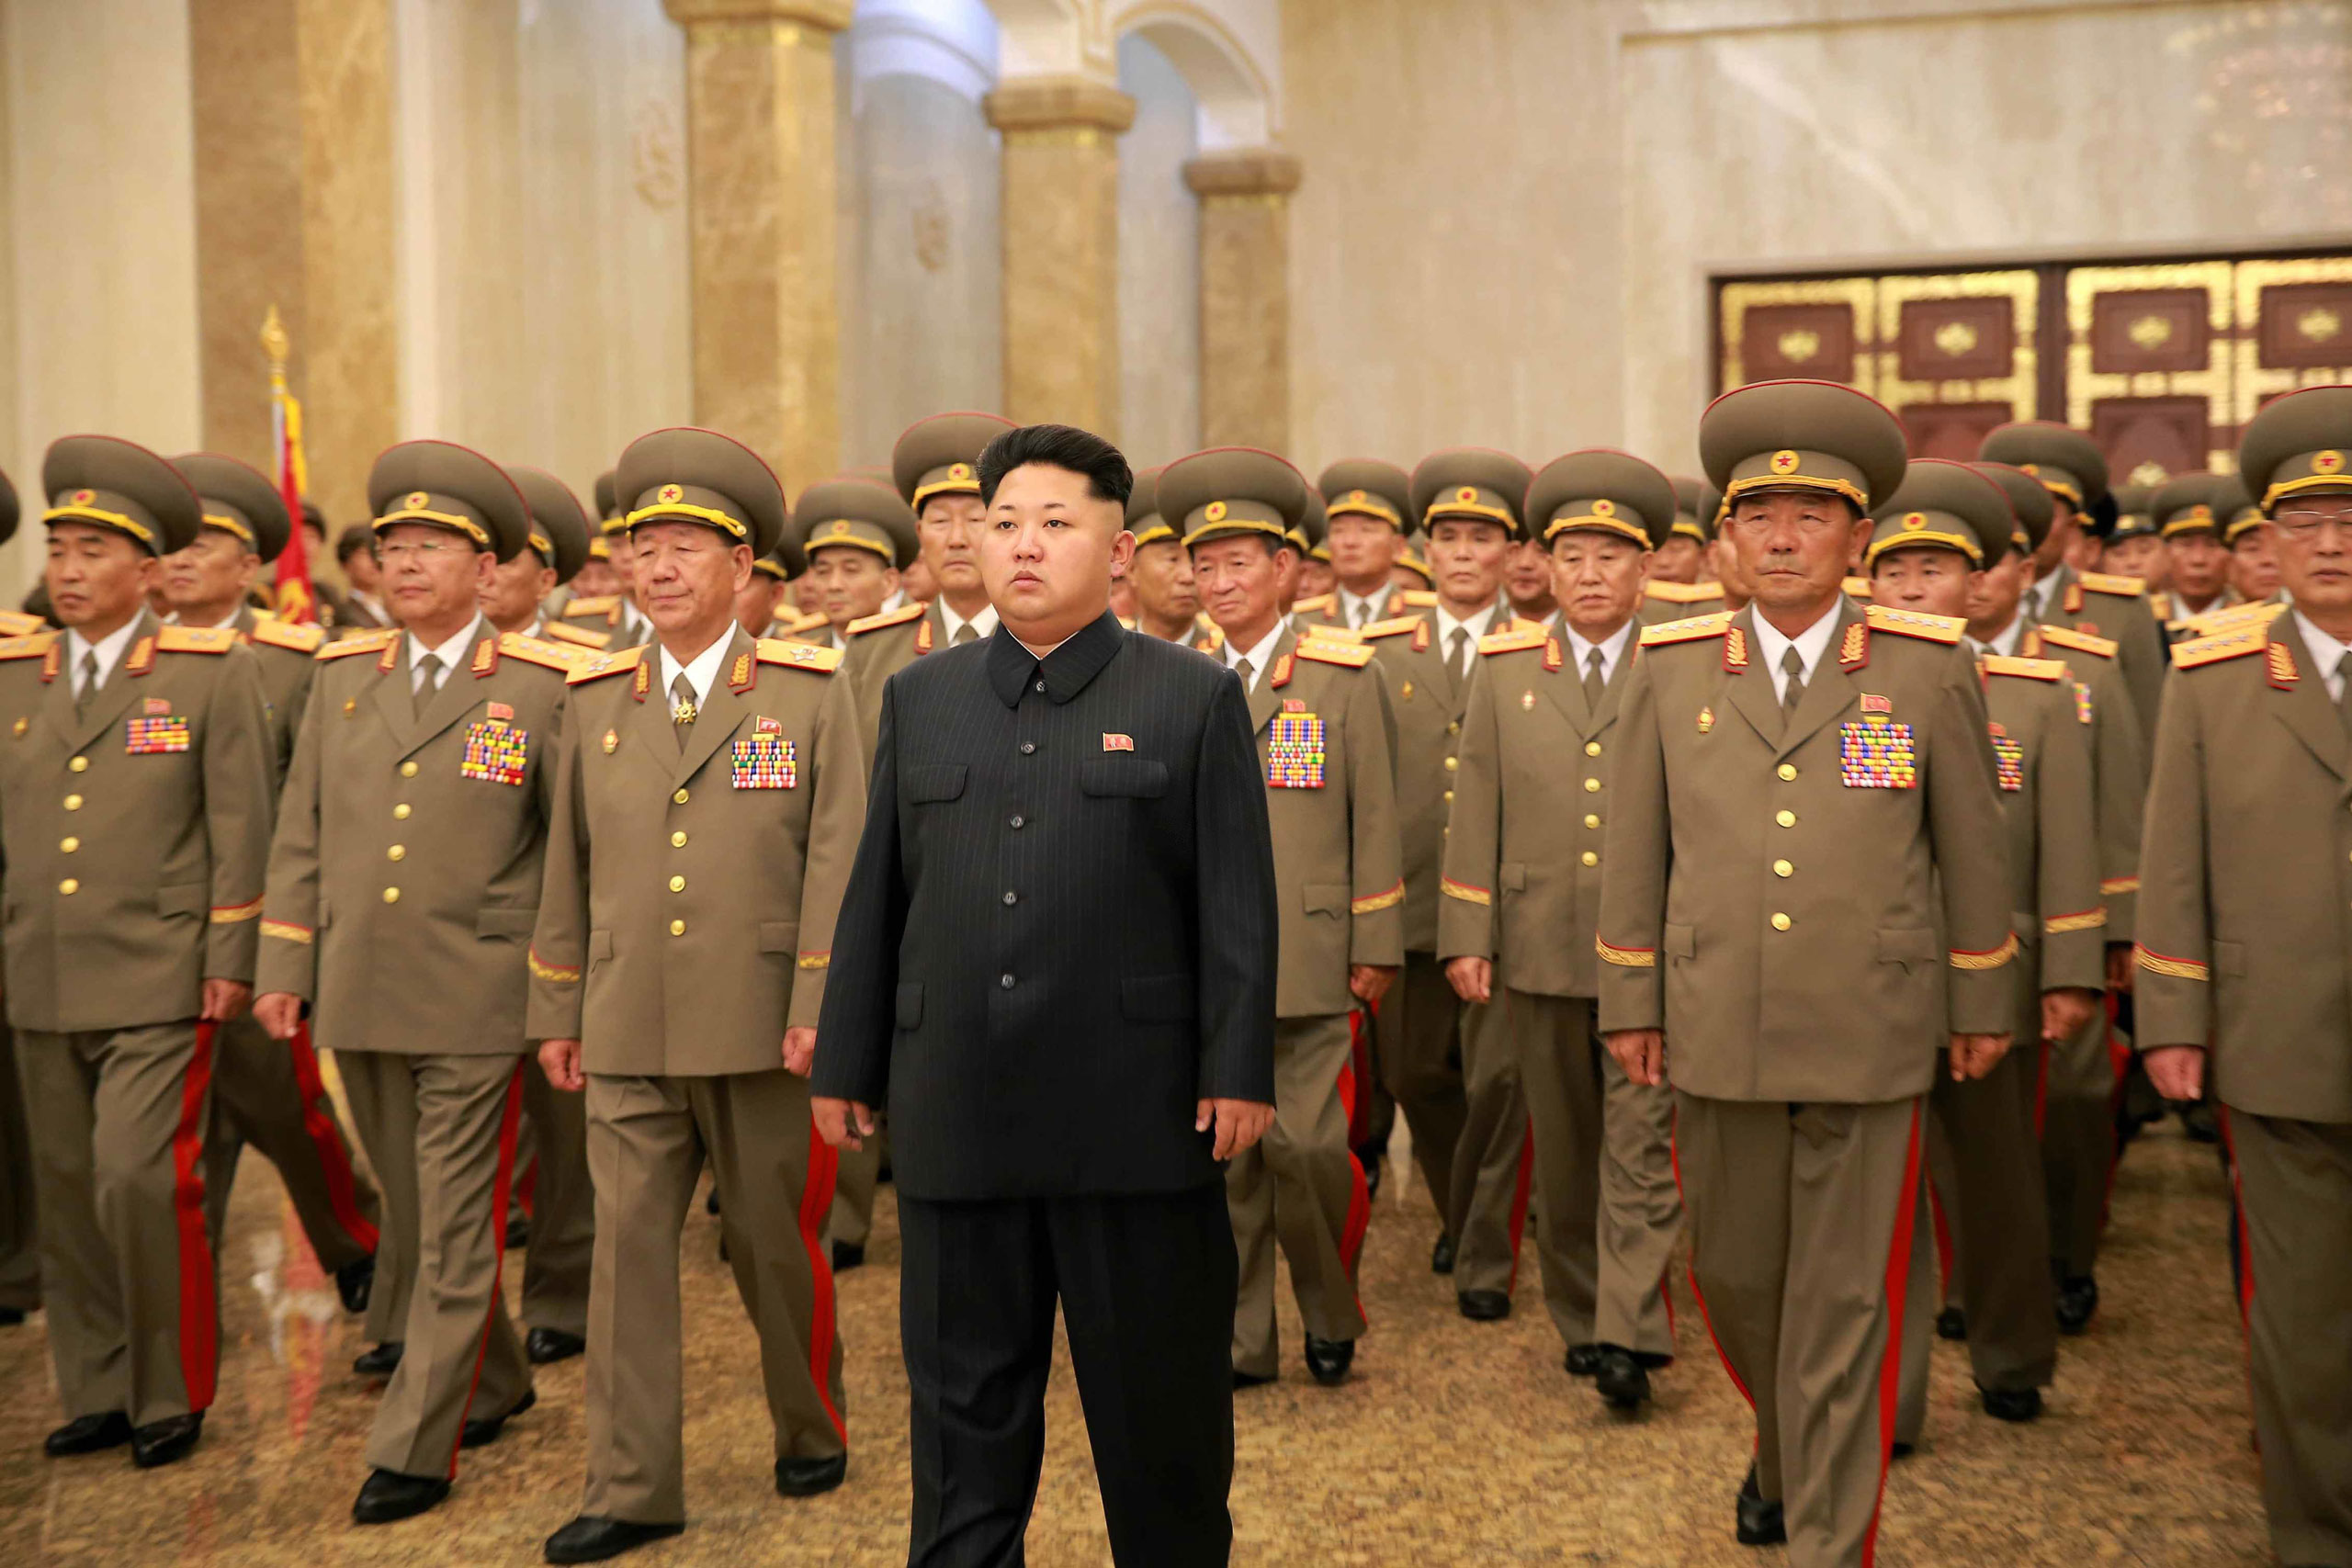 North Korean leader Kim Jong Un visits the Kumsusan Palace of the Sun on the 62nd anniversary of the Korean War armistice on July 27, 2015. (Xinhua/KCNA/Getty Images)